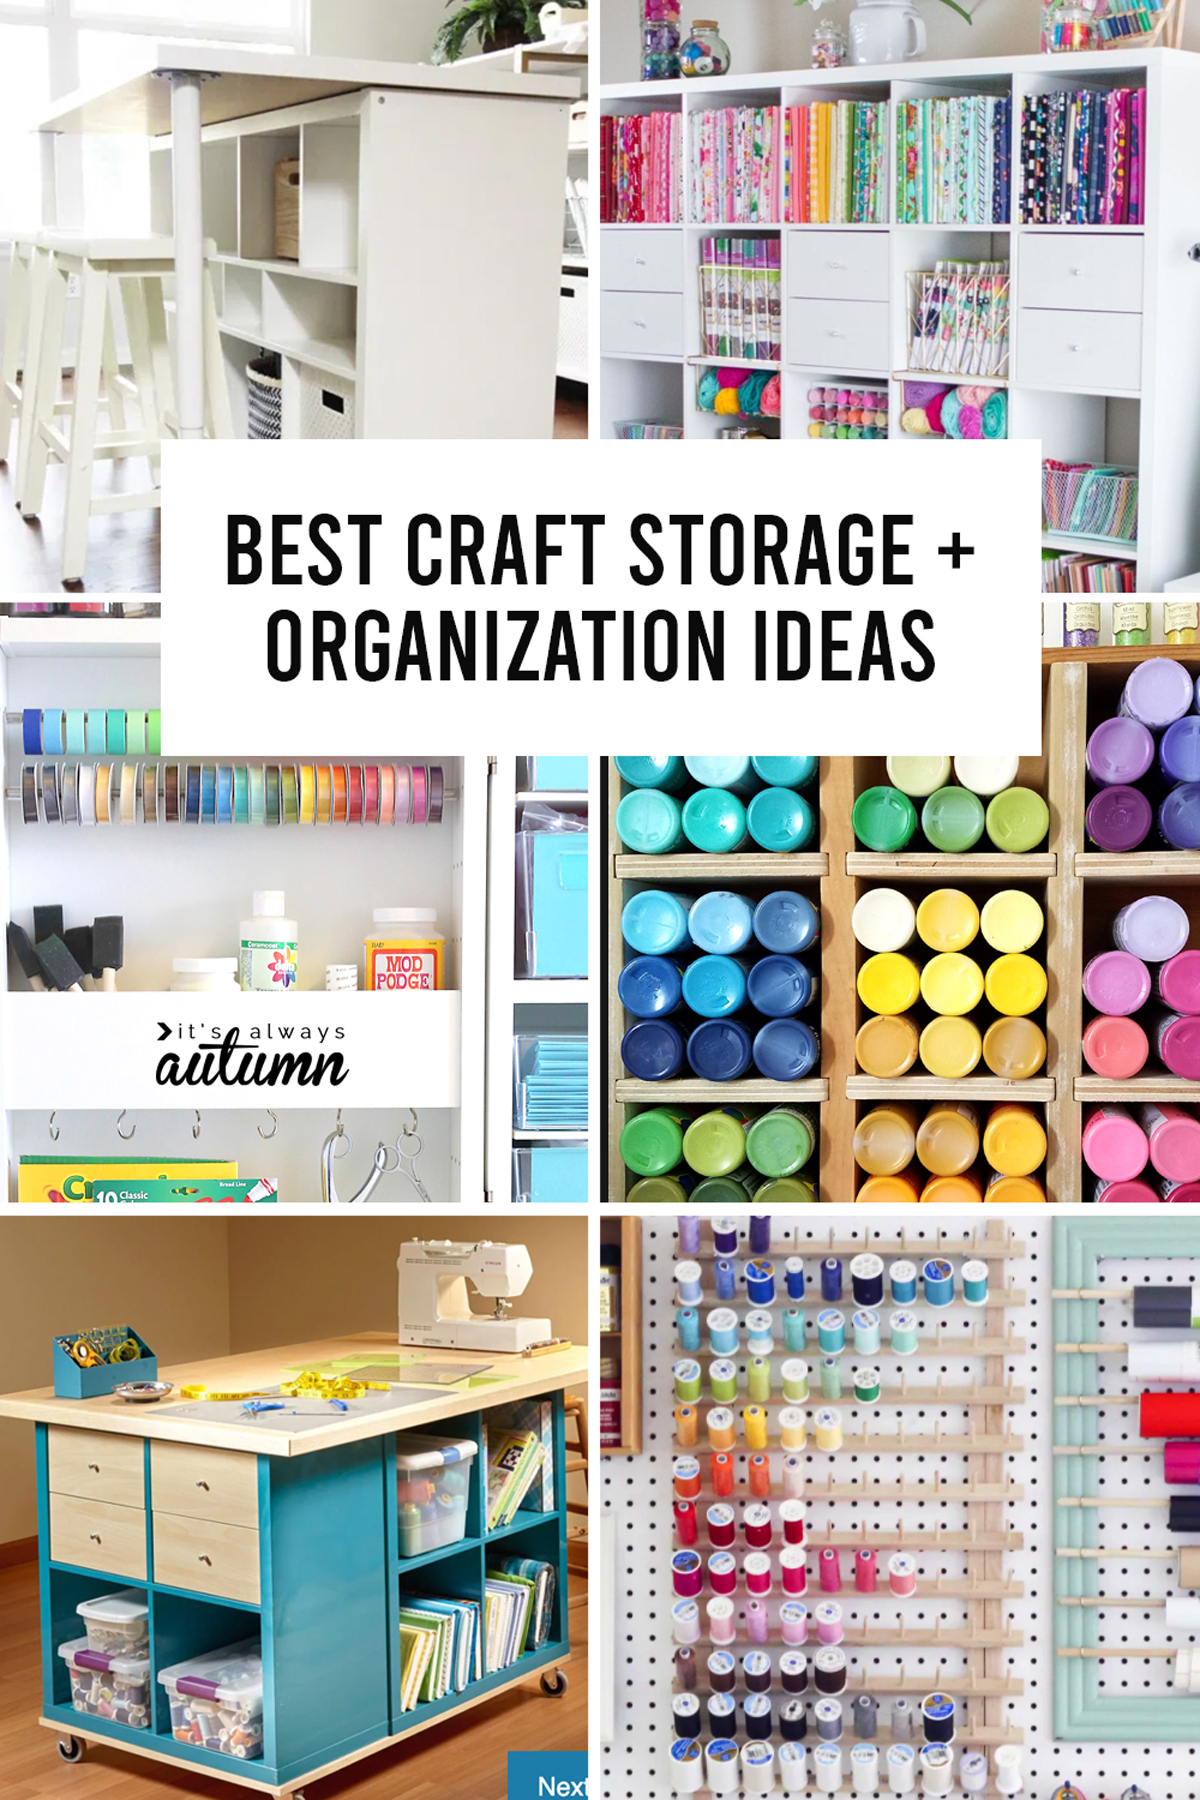 Top 5 Tips for an Organized Craft Room